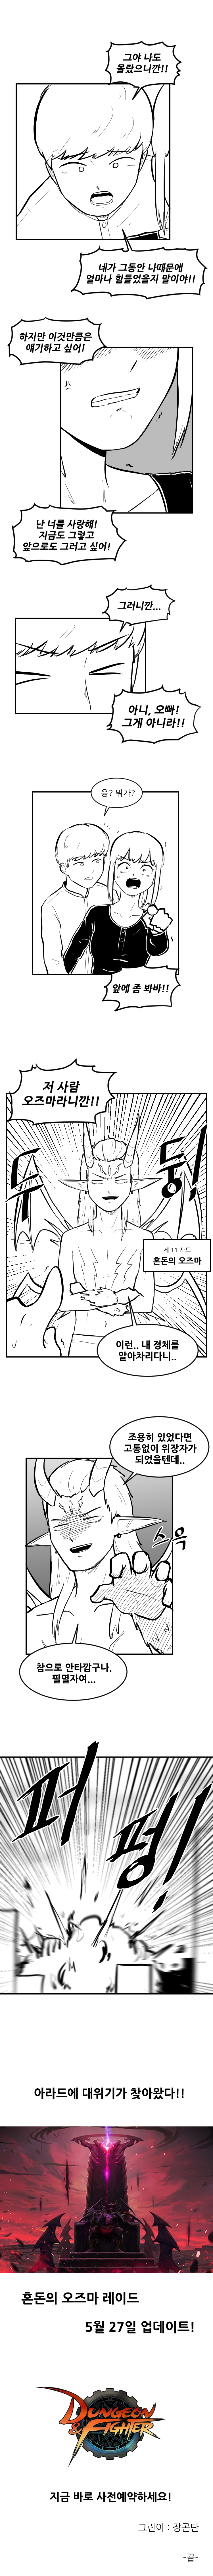 For the first time, manhwa speaks his mind.